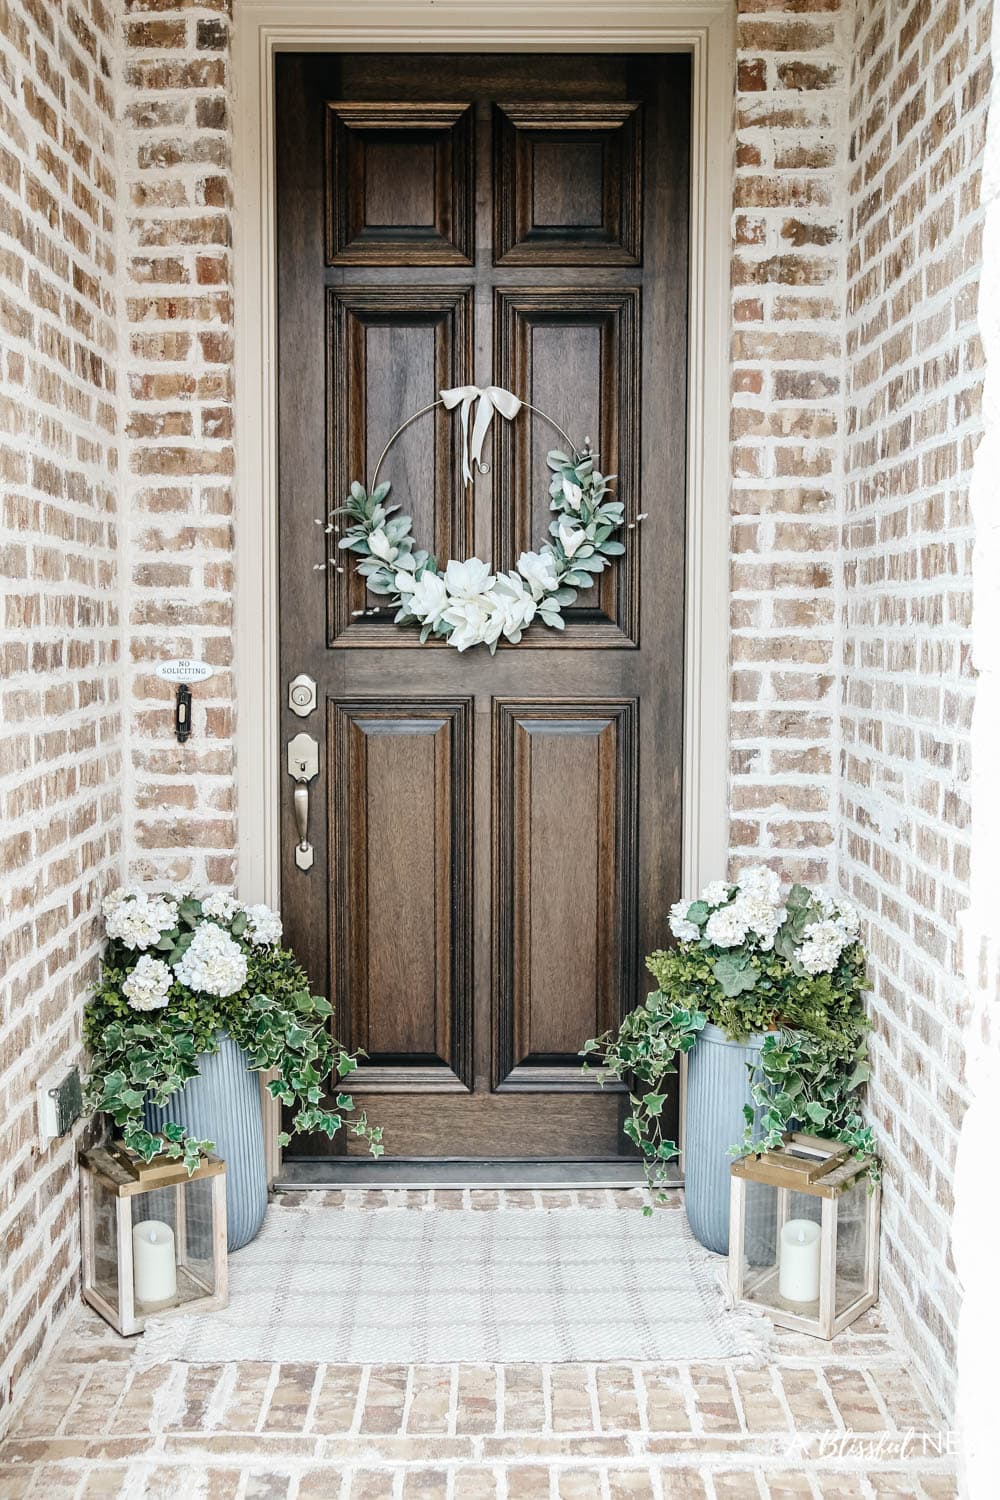 A simple fresh summer porch includes this beautiful hoop wreath, UV protected outdoor faux flowers, lanterns and more. #ABlissfulNest #summerporch #summerdecor